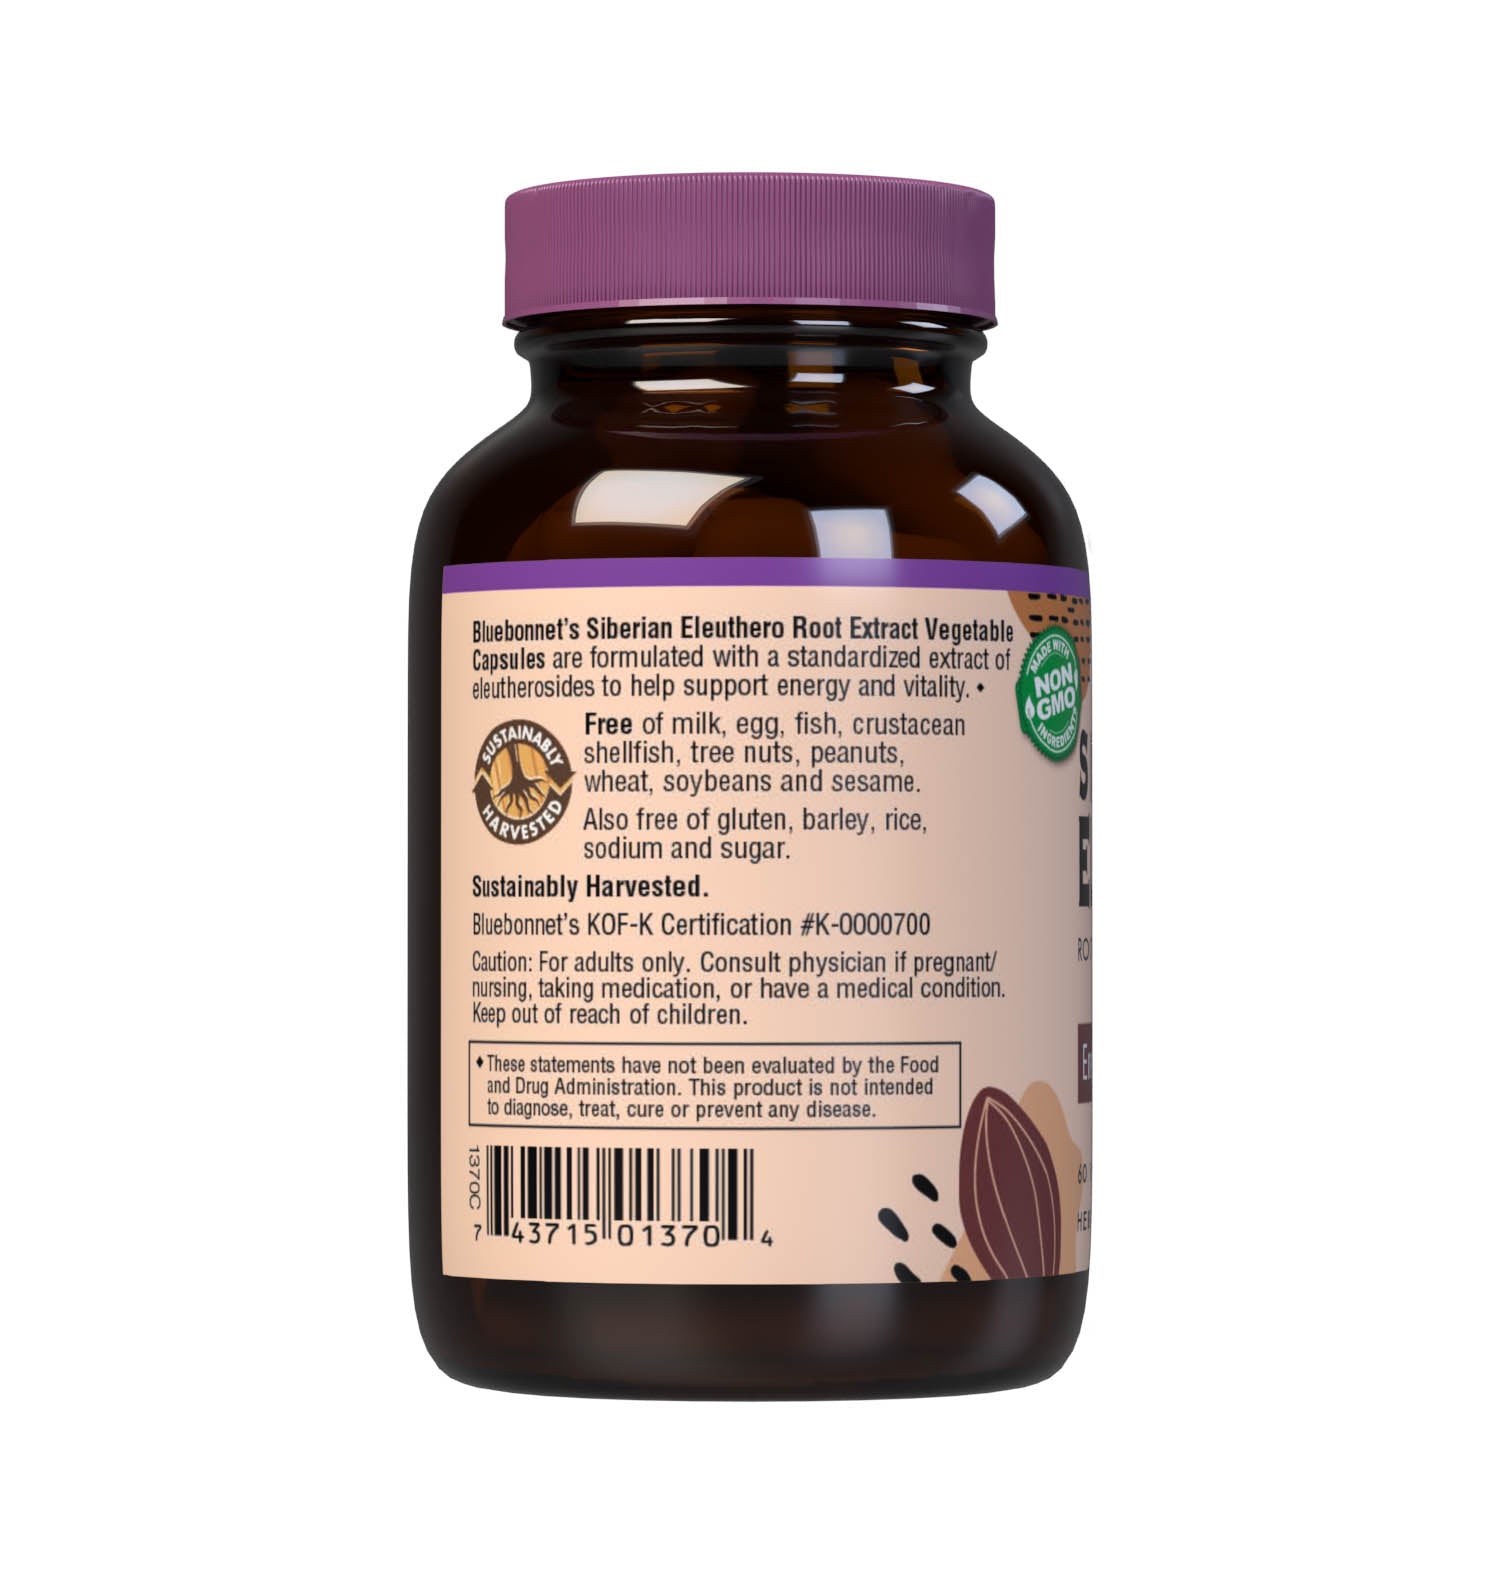 Bluebonnet’s Siberian Eleuthero Root Extract 60 Vegetable Capsules are formulated with a standardized extract of eleutherosides, the most researched active constituents found in Siberian eleuthero root. A clean and gentle water-based extraction method is employed to capture and preserve Siberian eleuthero root’s most valuable components. Description panel. #size_60 count